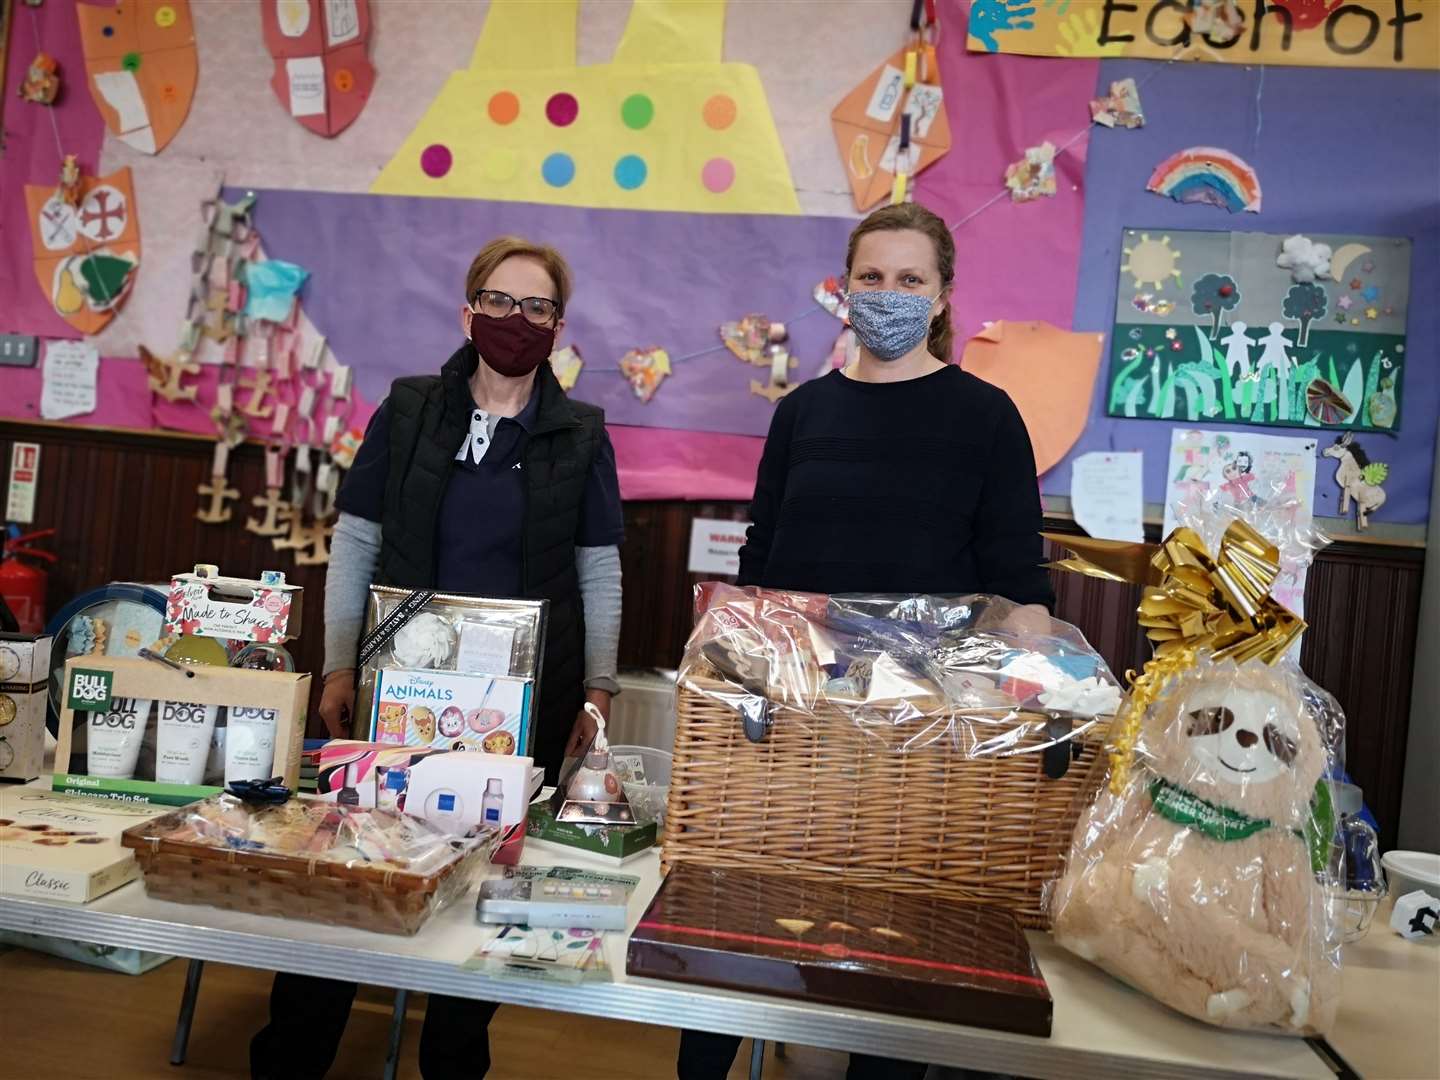 Stalls at the coffee morning were loaded with donated goods.